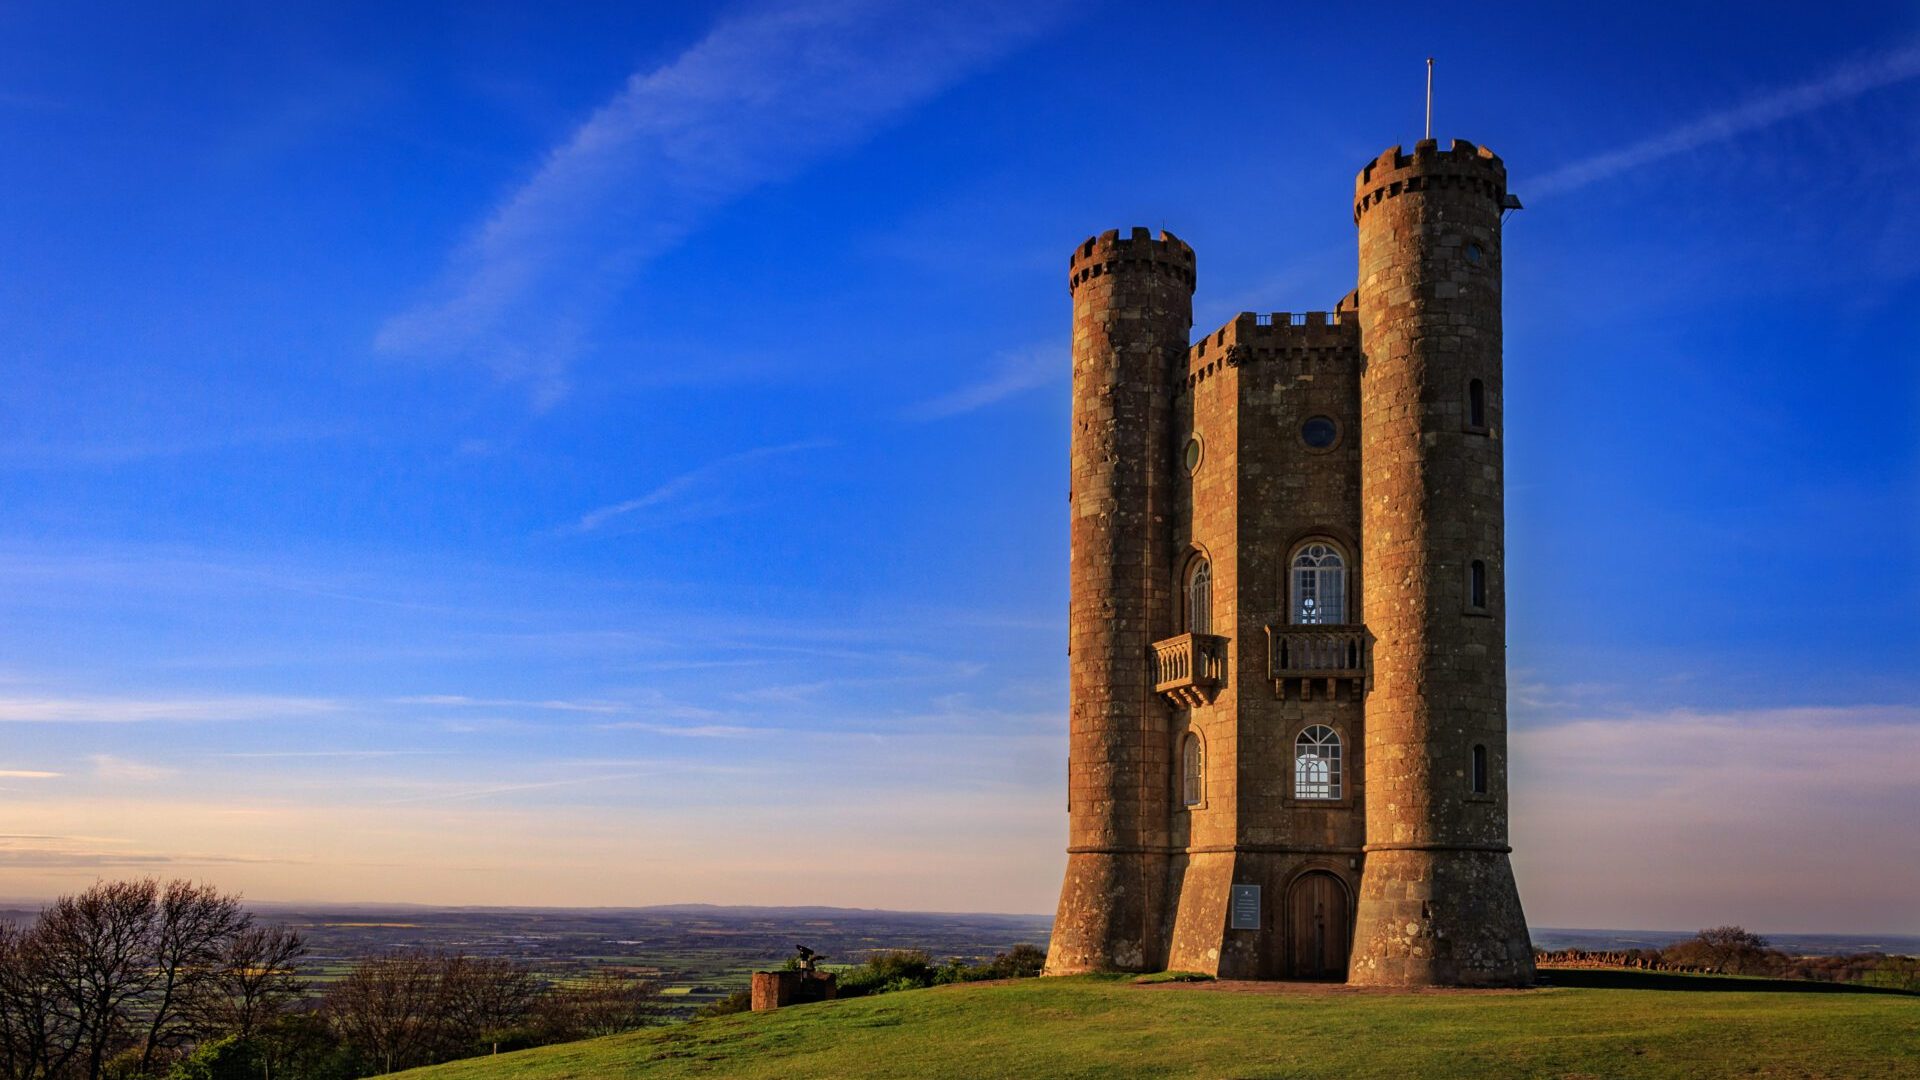 Broadway Tower in the Cotswolds countryside